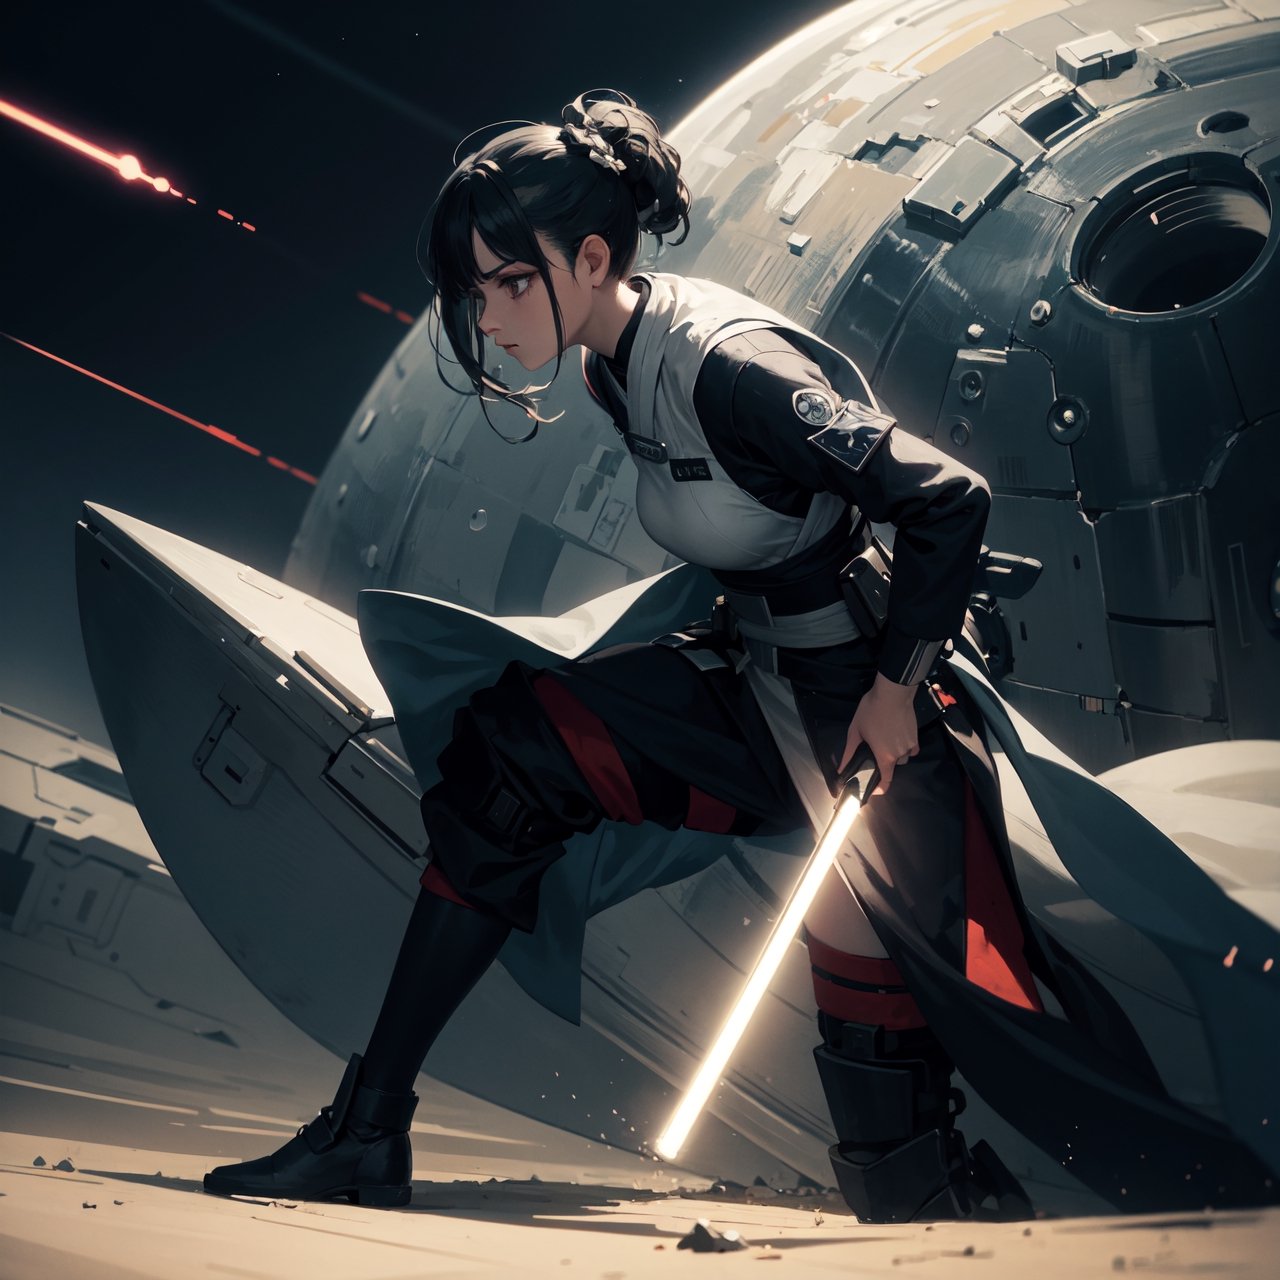 masterpiece, best quality, highly detailed, 8k illustration, {1girl, jedi}, serious, standing in combat pose, holding 1lightsaber, barren land, sky that shows outer space, cinematic, dynamic angle, dynamic pose, (solo female)